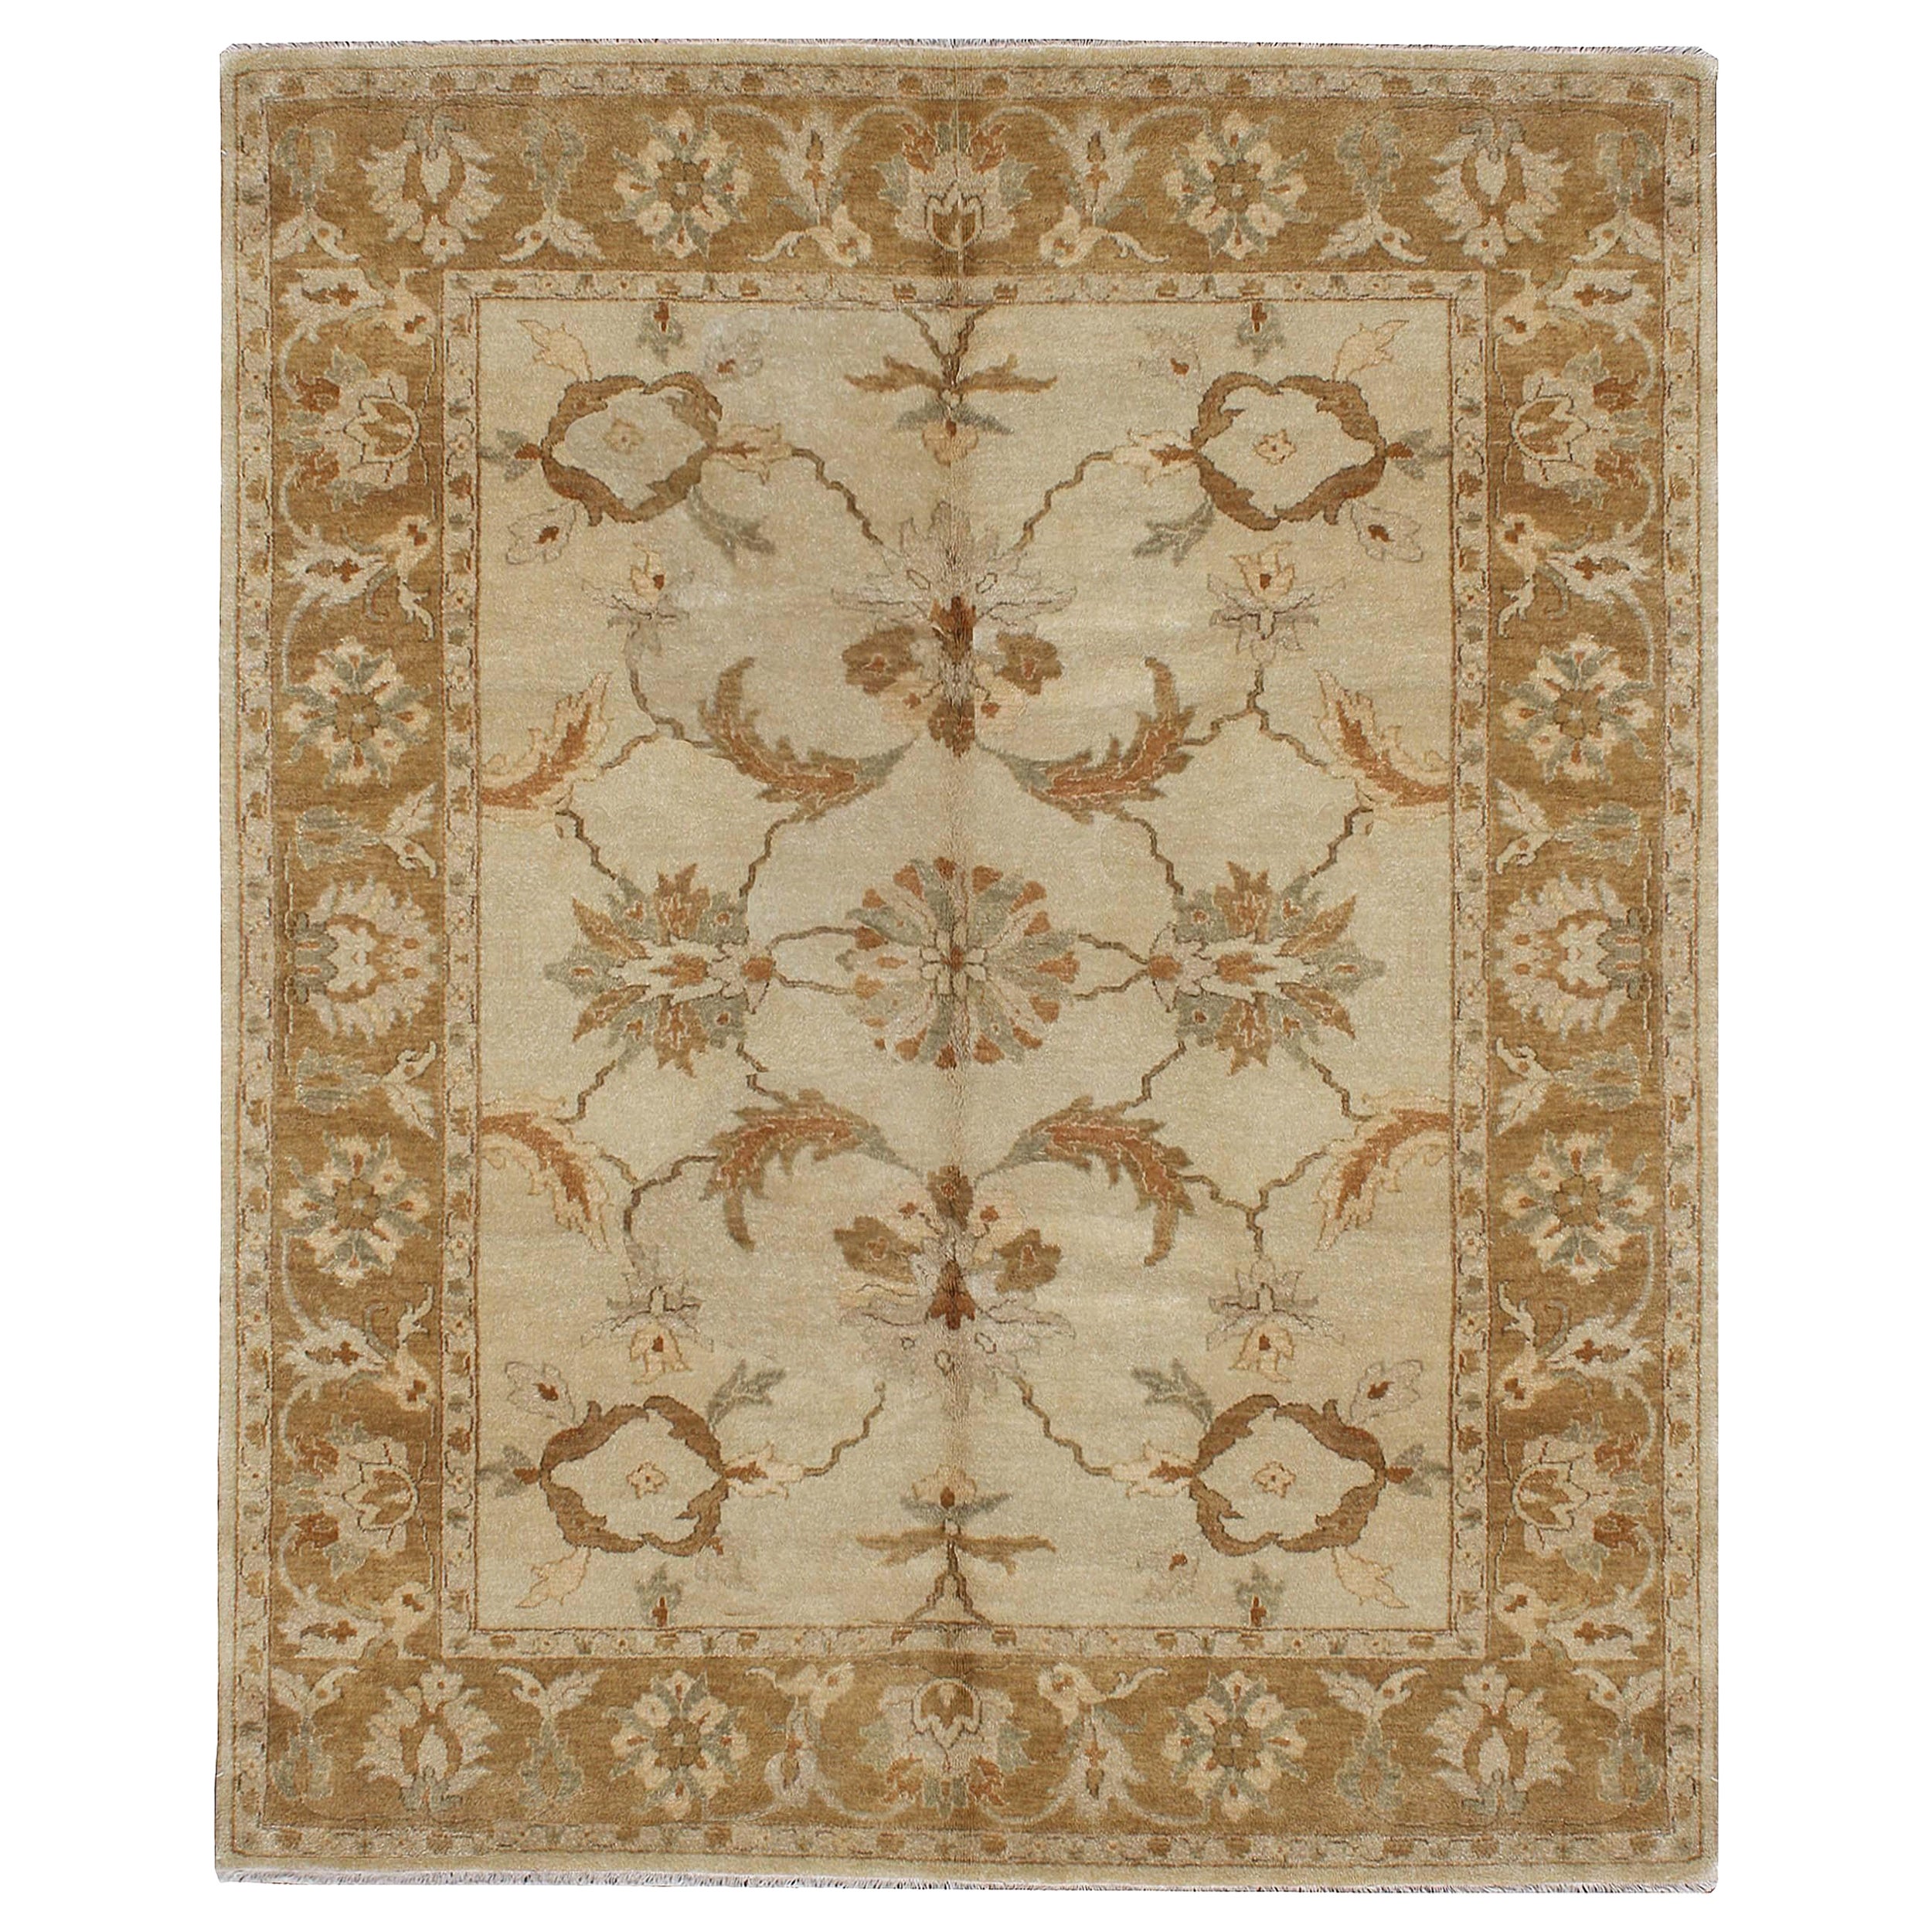 Luxury Traditional Hand-Knotted Agra Ivory & Camel 10x14 Rug